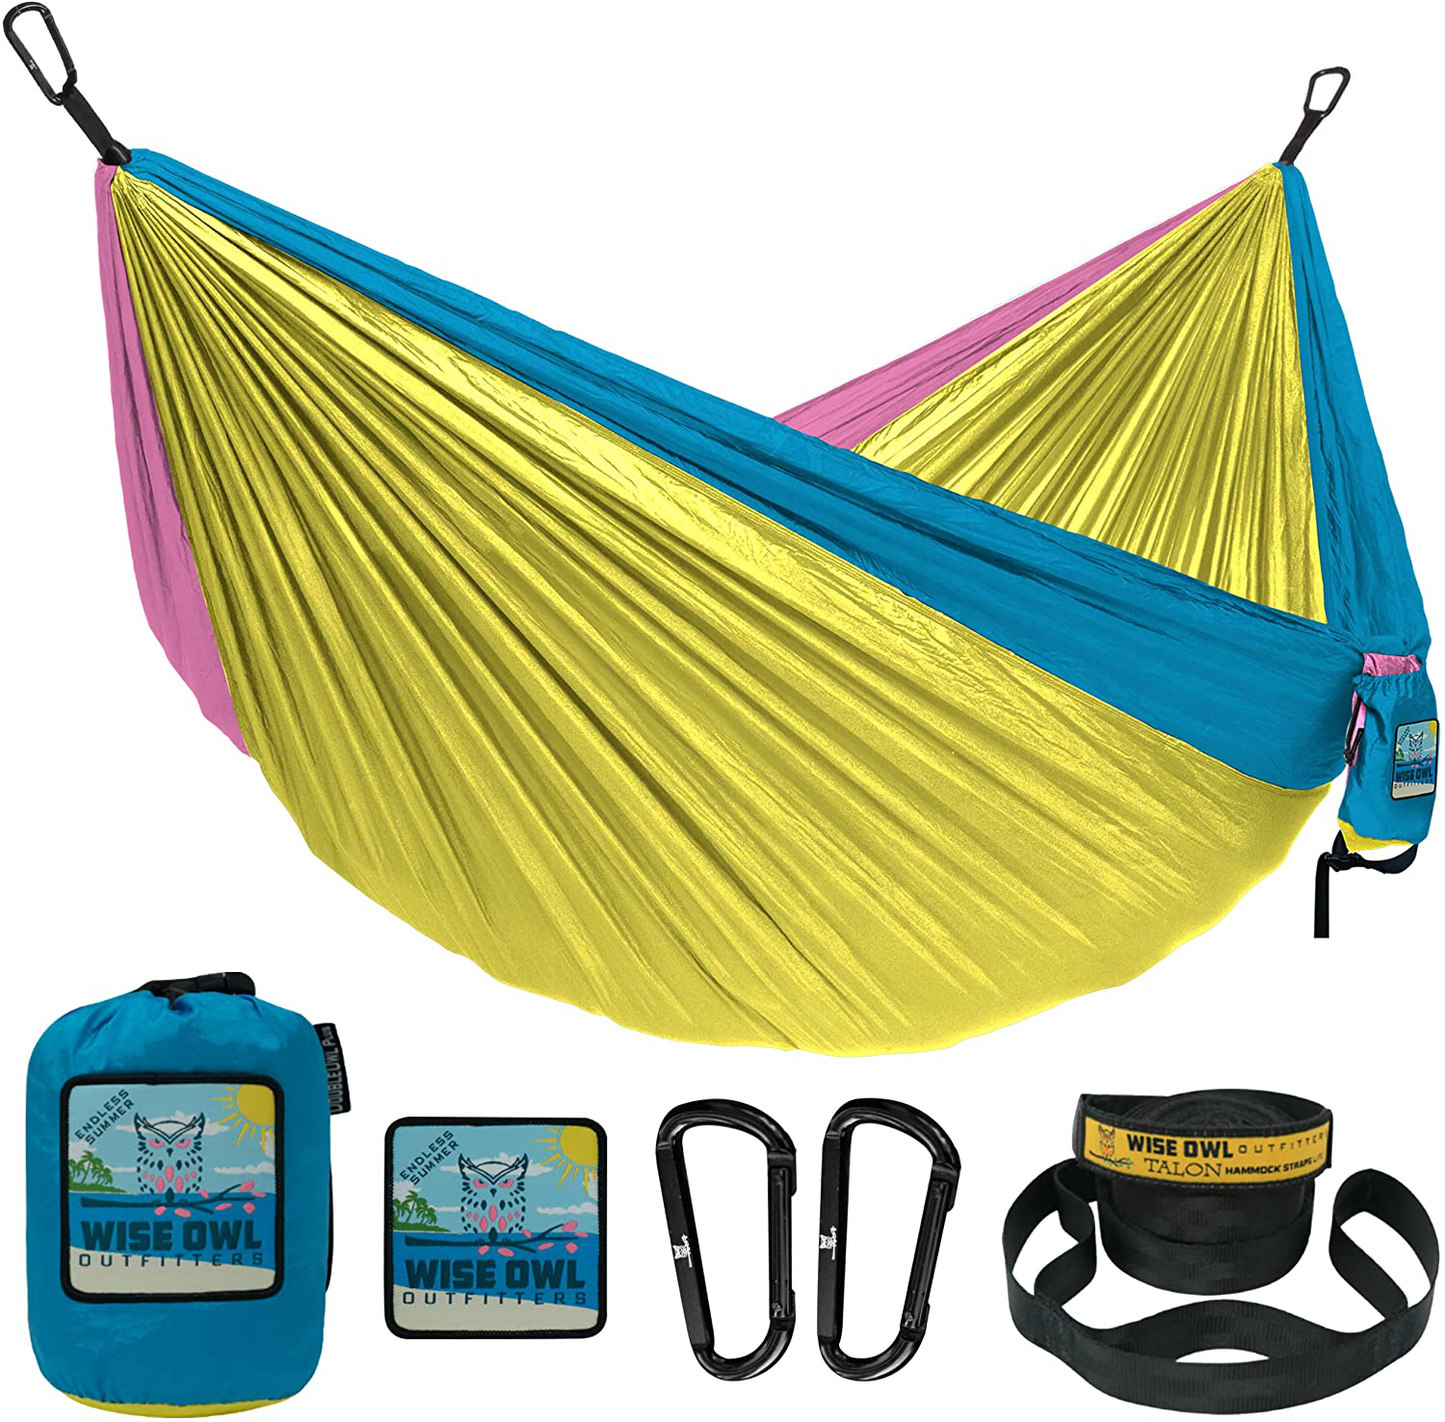 Wise Owl Outfitters Camping Hammocks - Portable Hammock Single or Double Hammock for Outdoor, Indoor W/ Tree Straps - Backpacking, Travel, and Camping Gear